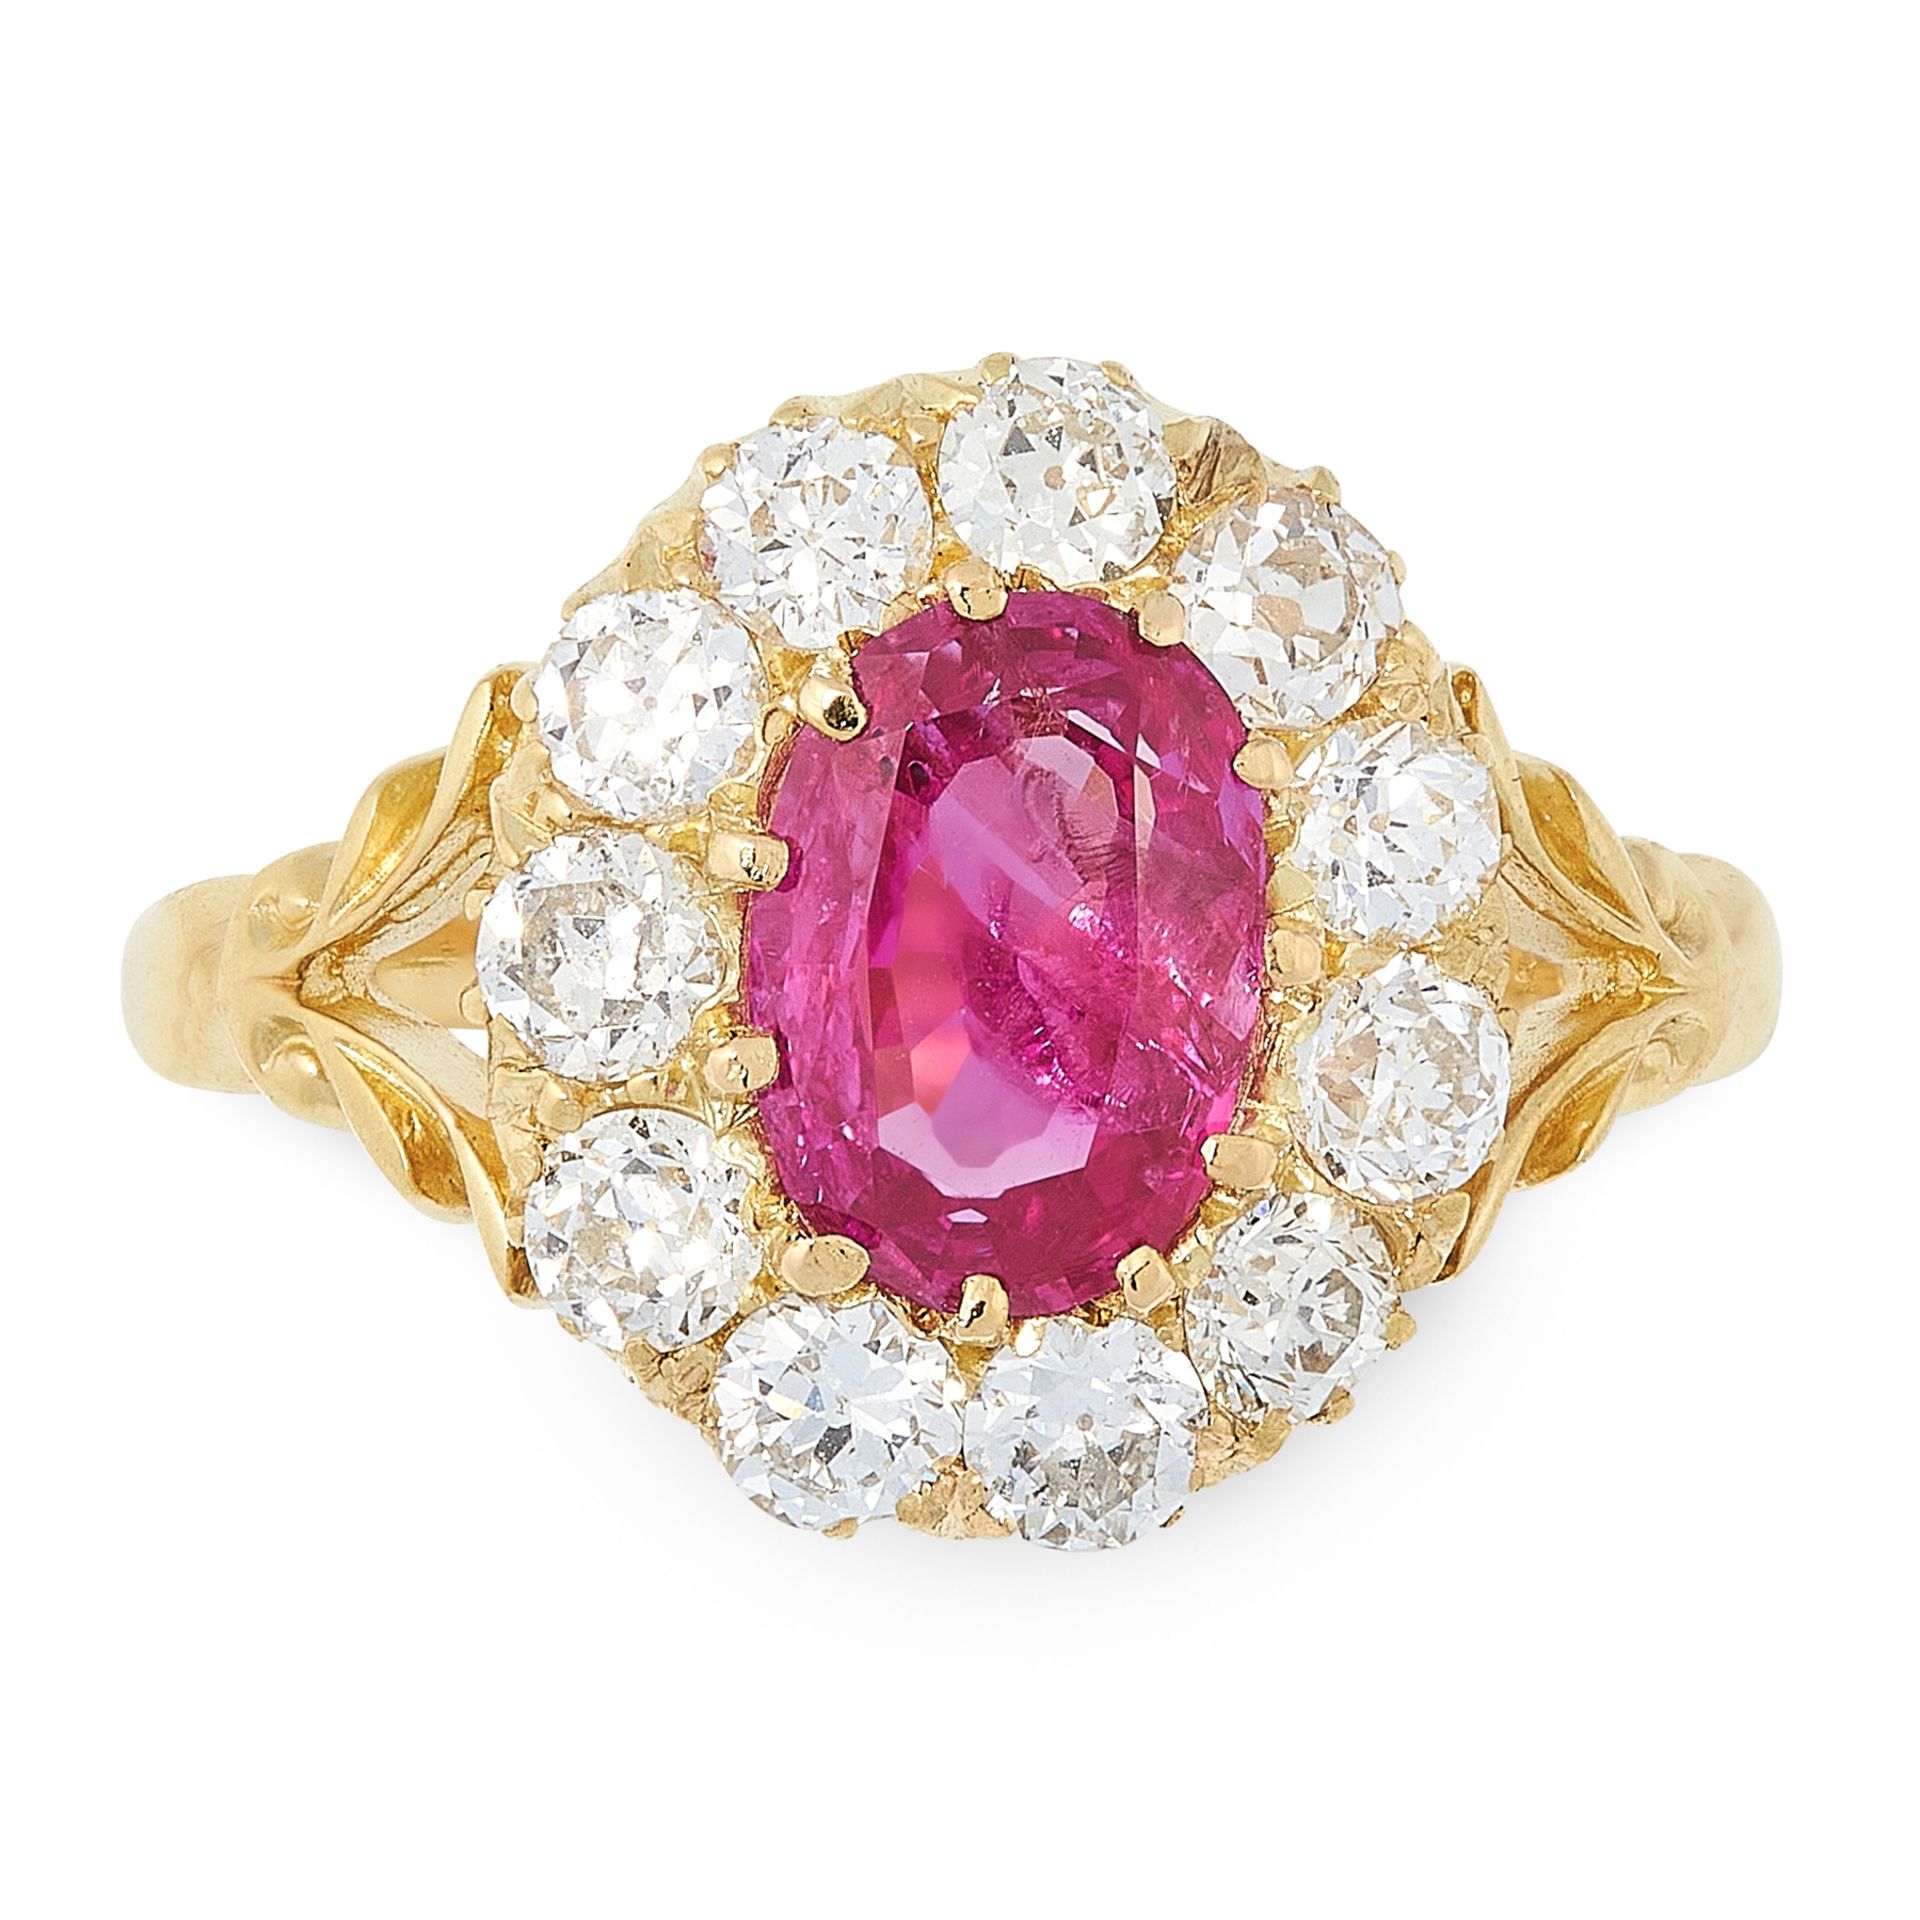 AN ANTIQUE BURMA NO HEAT RUBY AND DIAMOND RING in 18ct yellow gold, set with an oval cut ruby of 1.